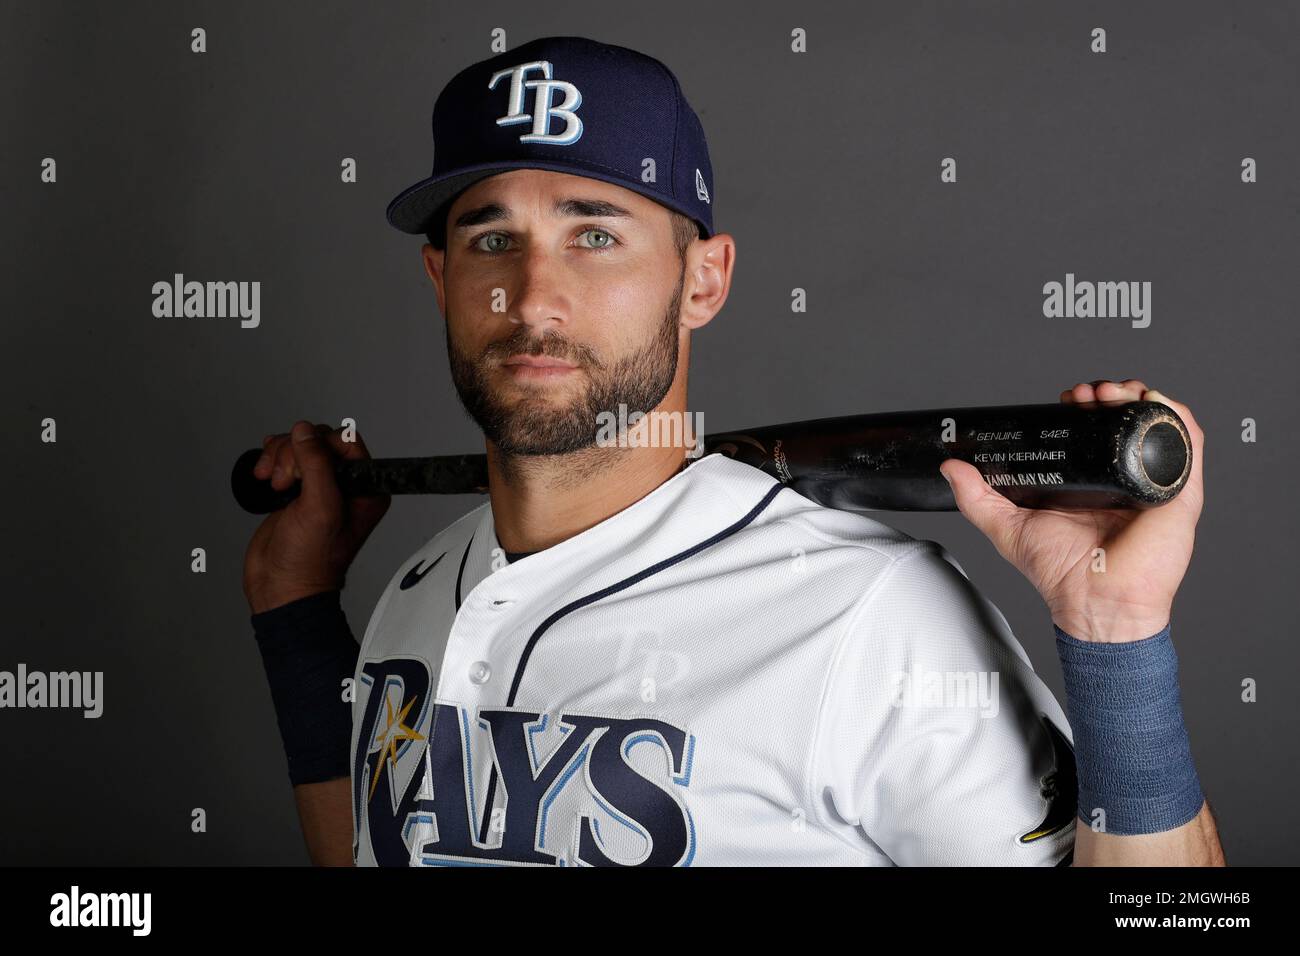 This is a 2020 photo of Kevin Kiermaier of the Tampa Rays baseball